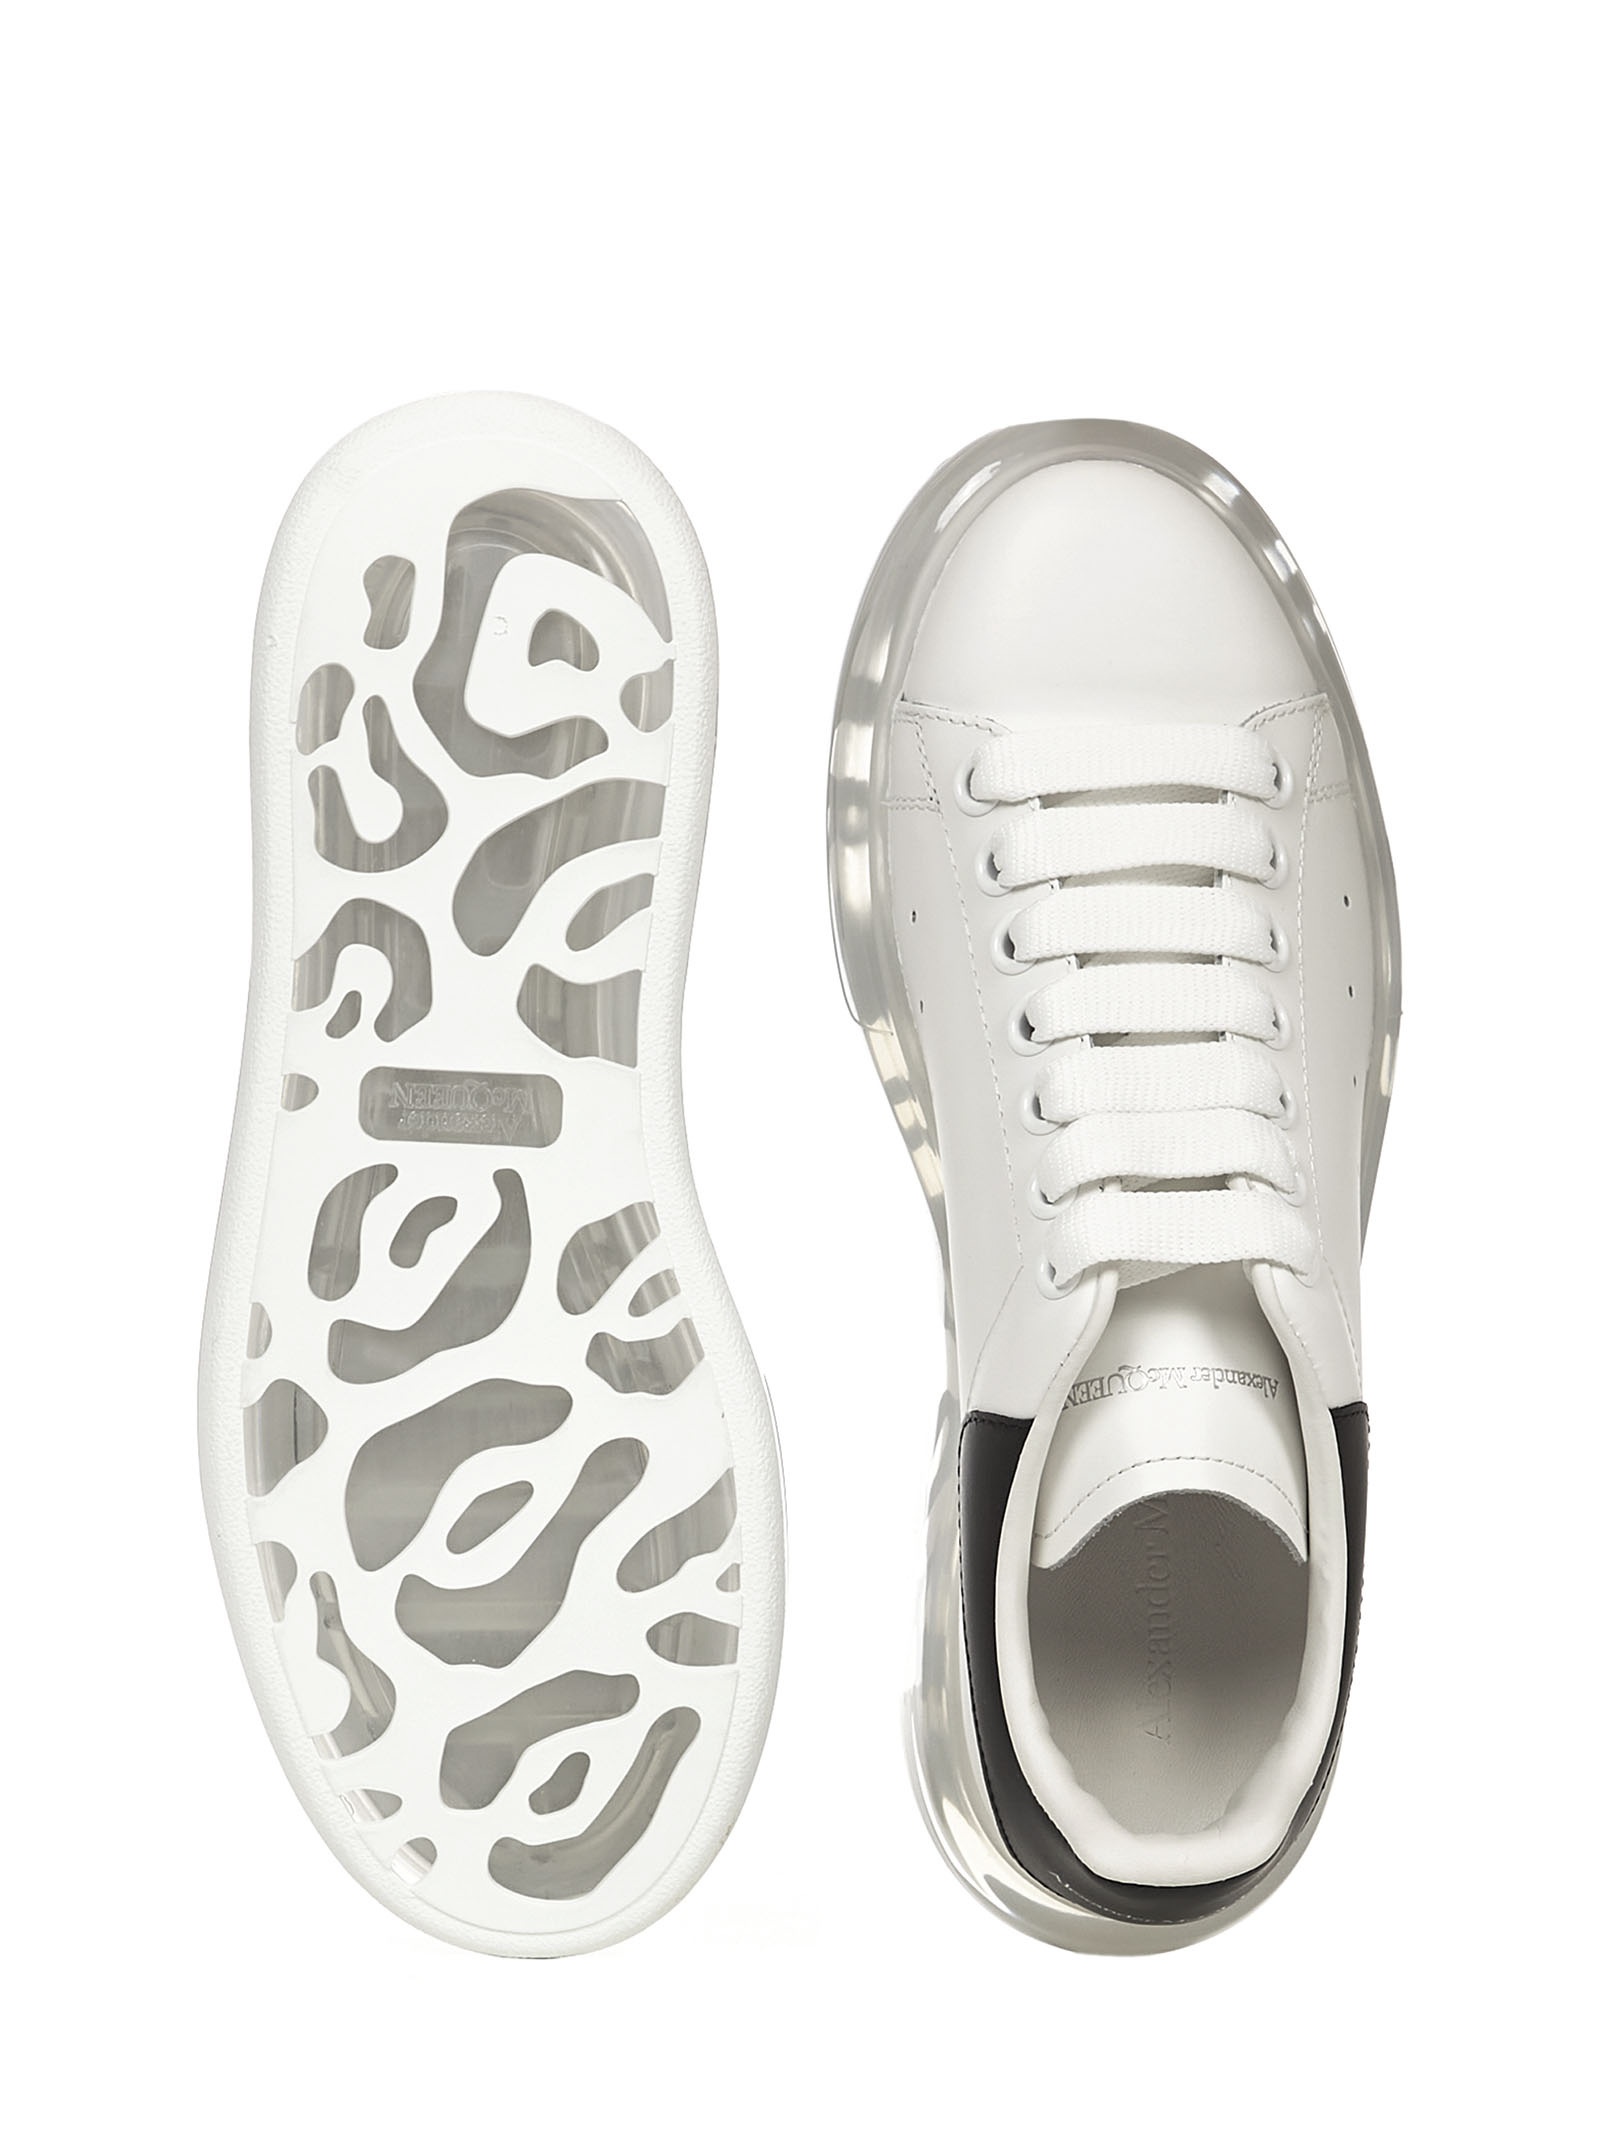 Larry sneakers in white calfskin with black leather insert on the heel and transparent oversized sol - 4